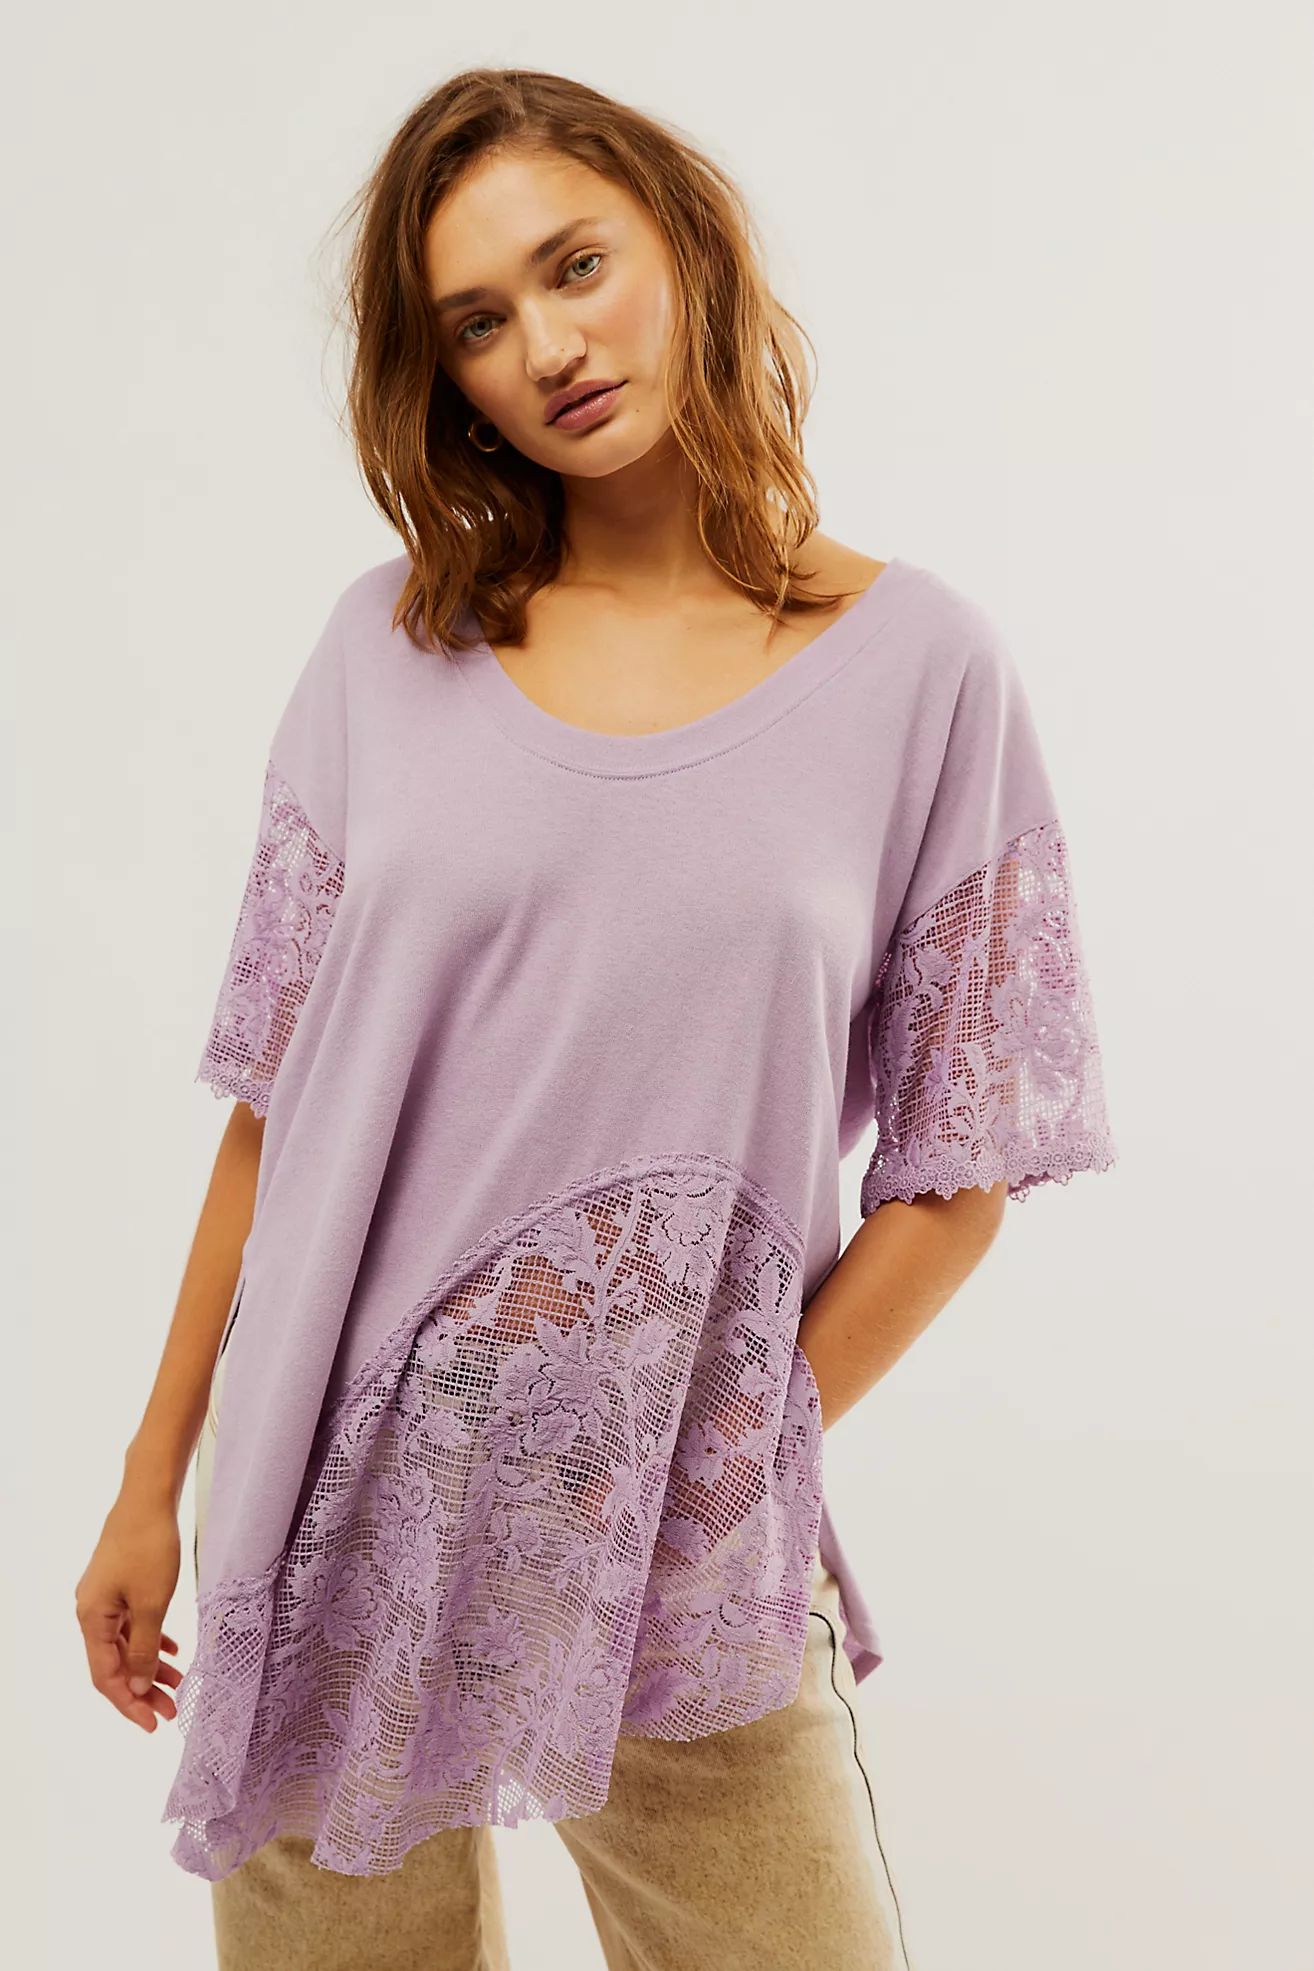 Chasing You Top | Free People (Global - UK&FR Excluded)